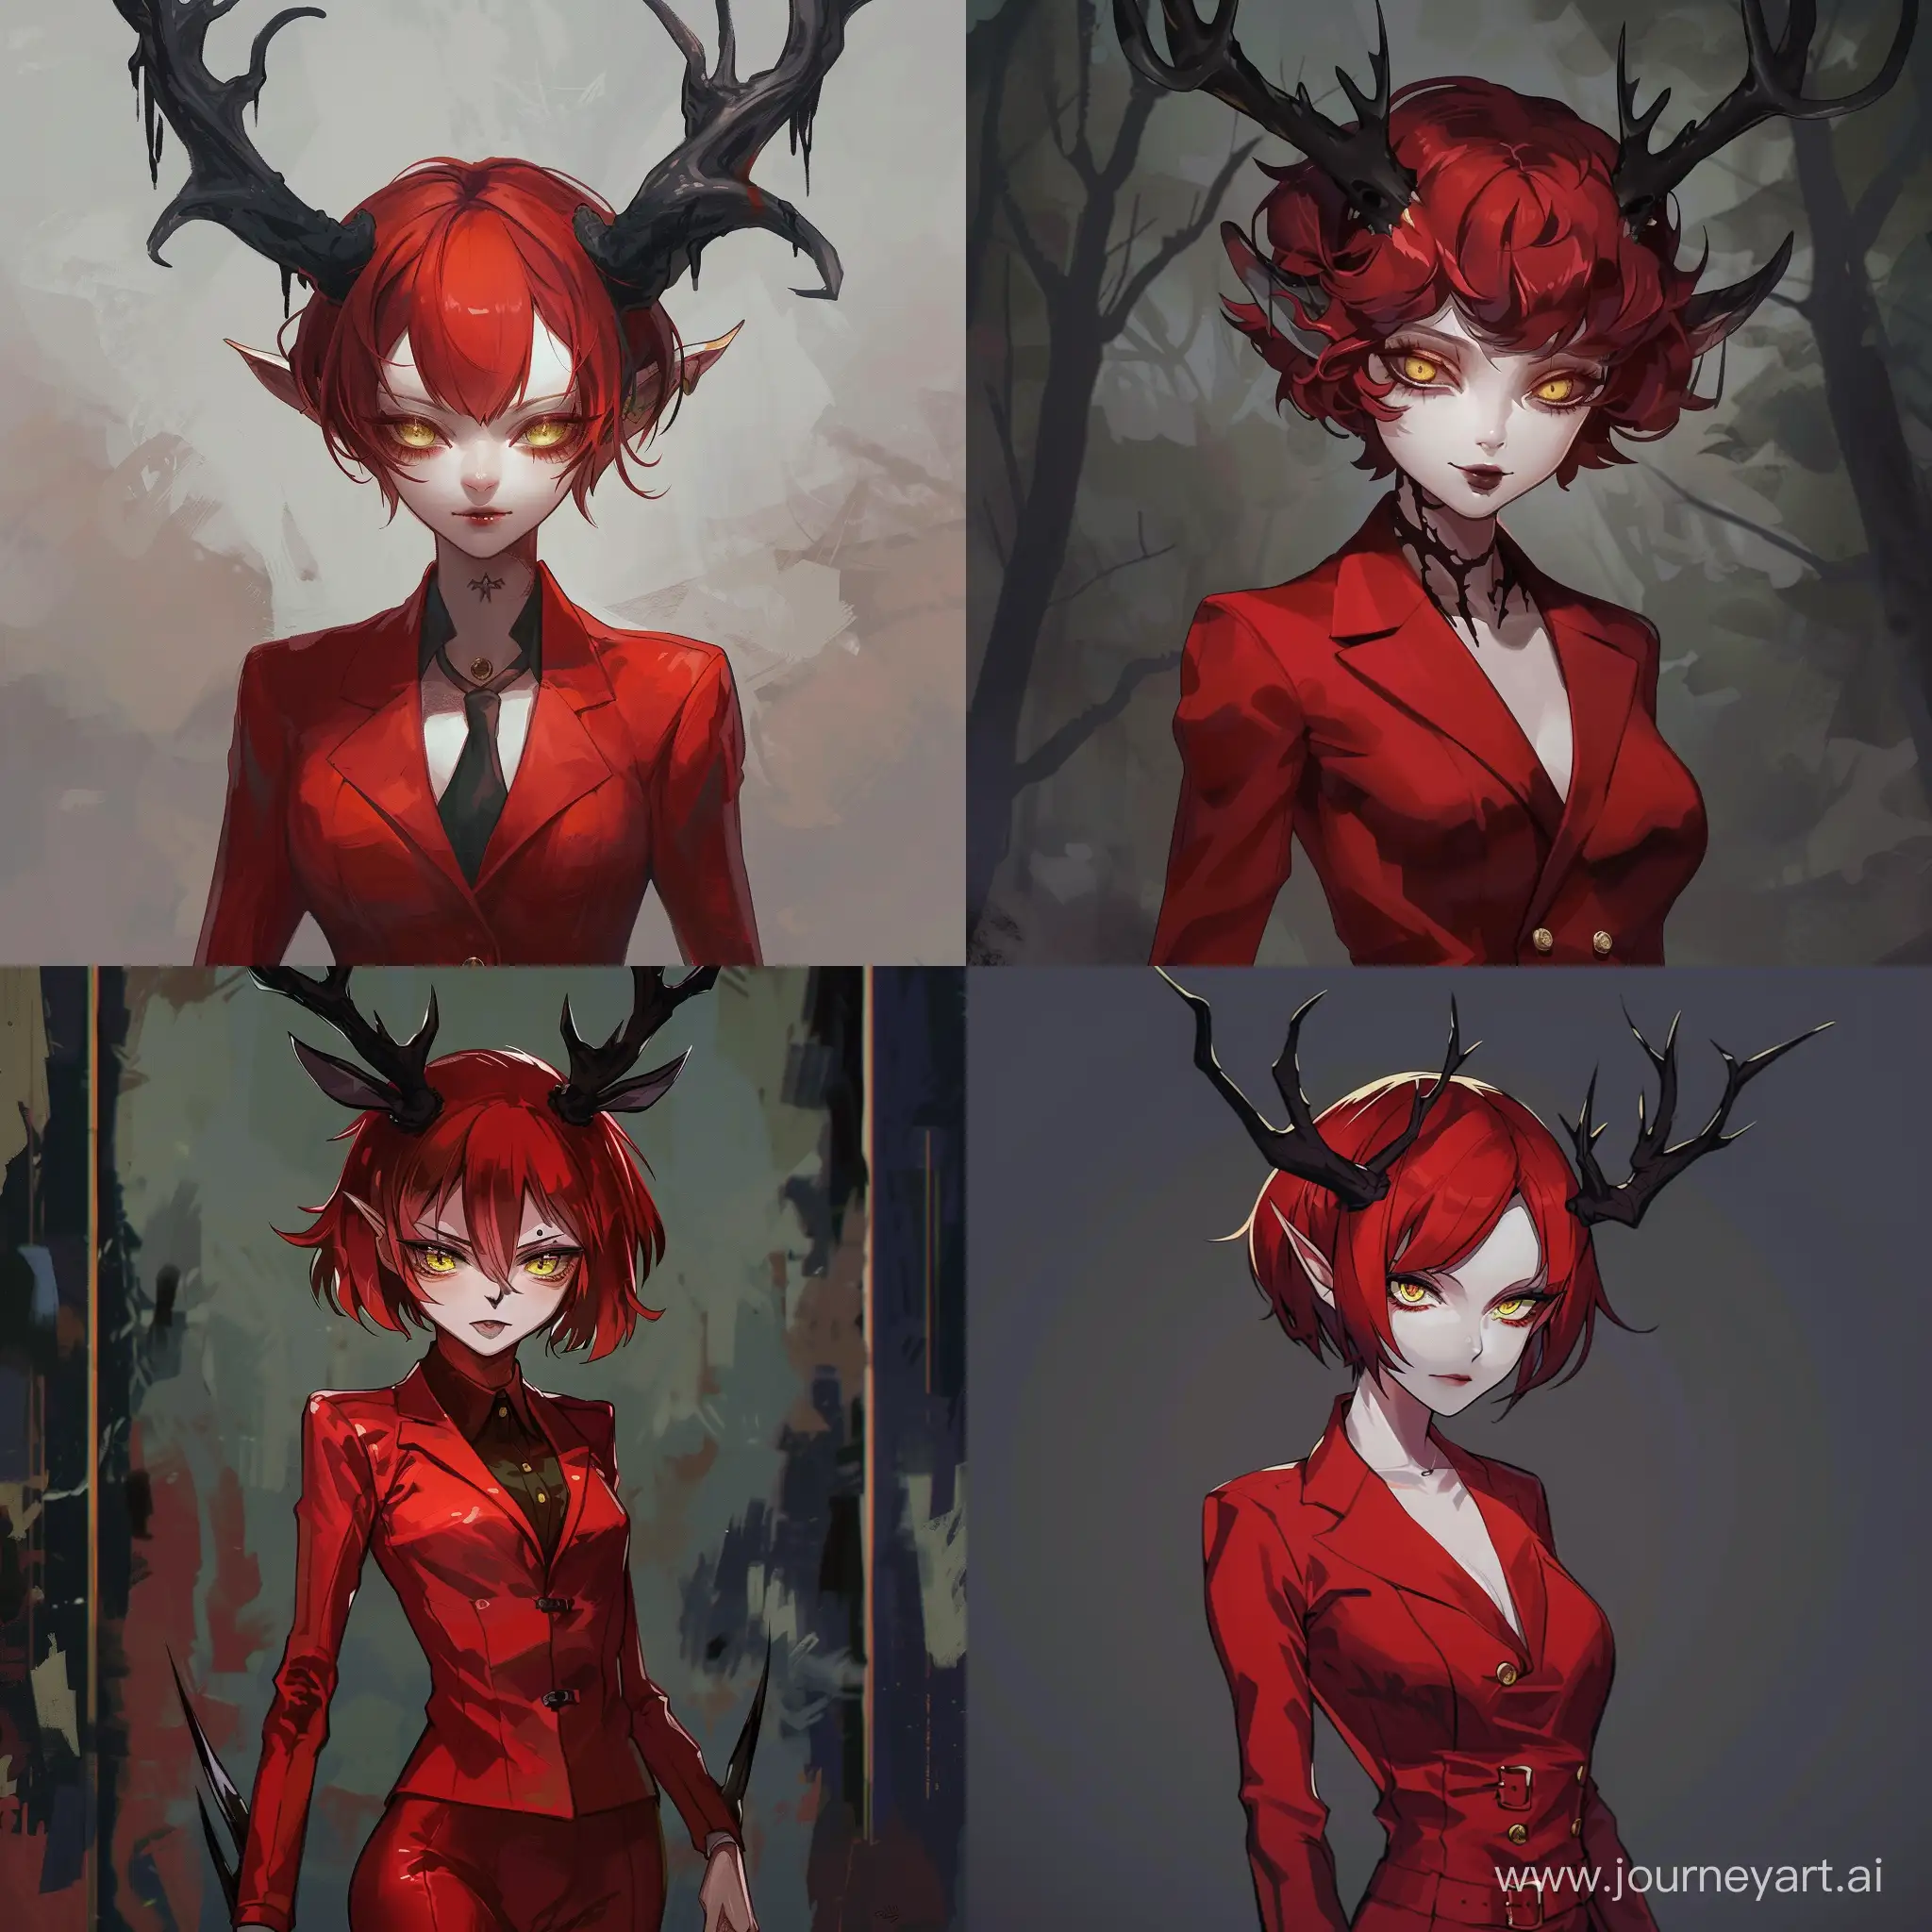 Anime-Demon-Girl-with-Black-Deer-Horns-in-Red-Suit